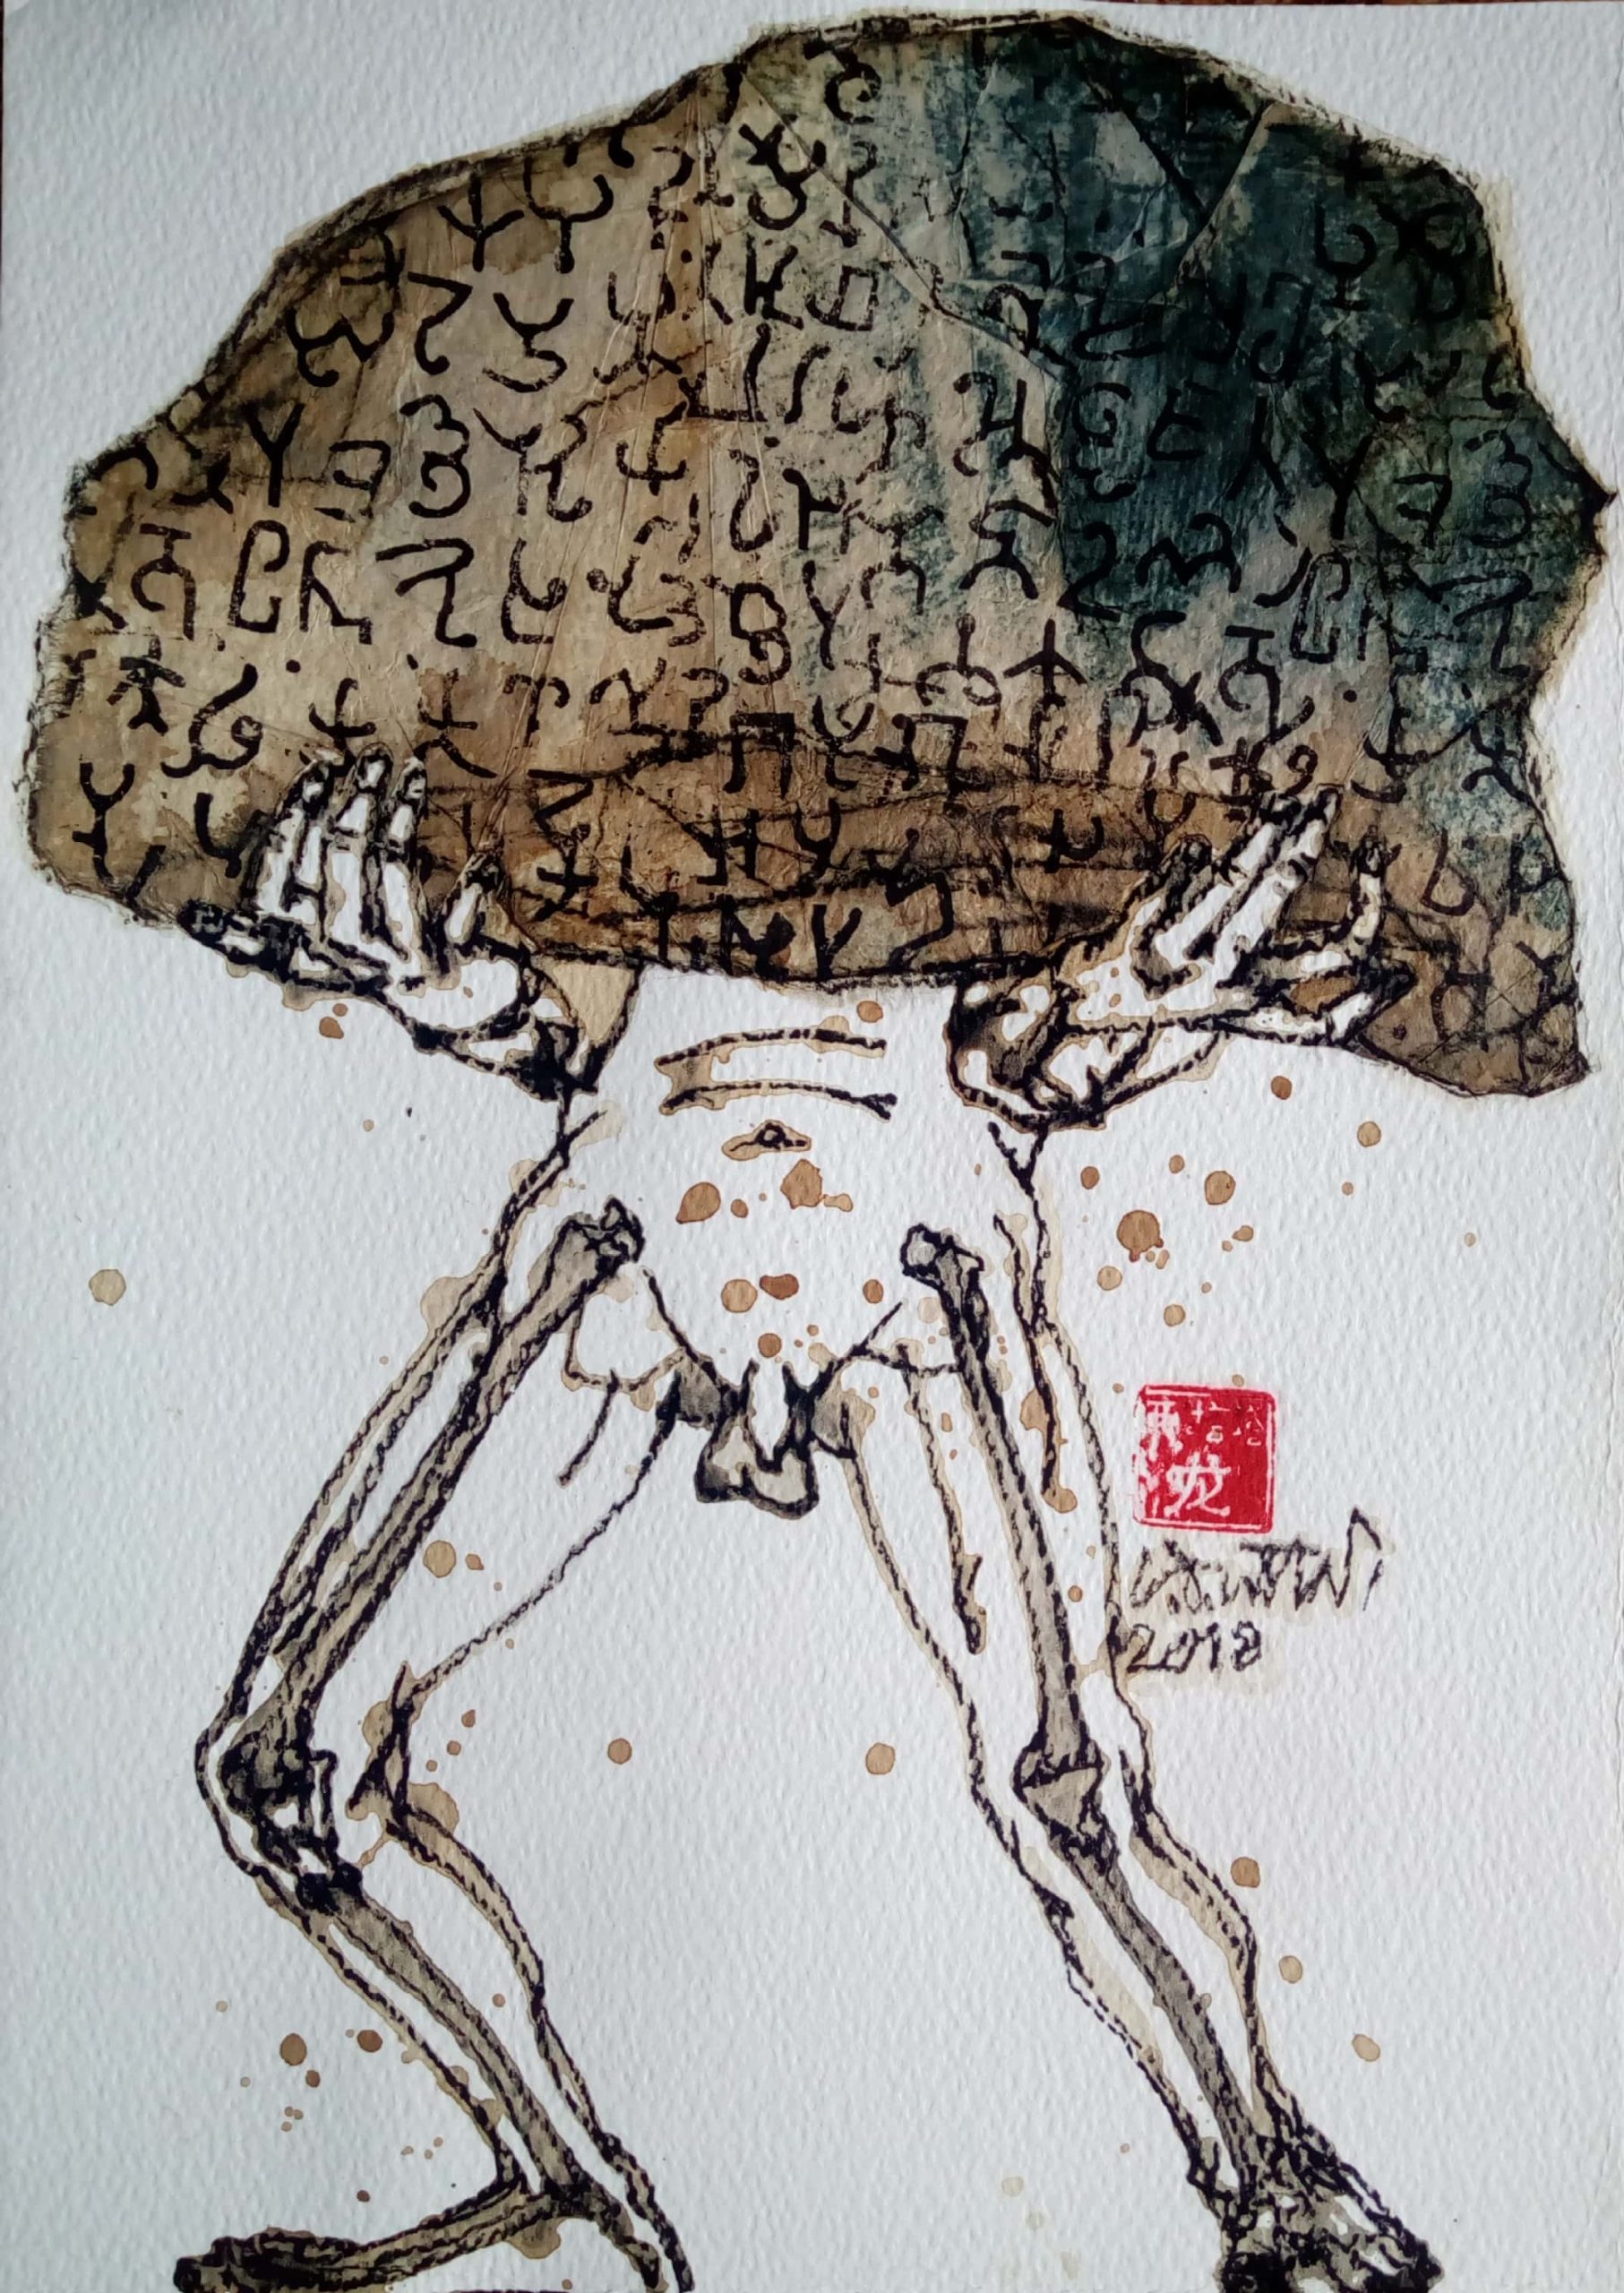 IN THE WORLD OF TEXTUAL HEGEMONY IV CHARCOAL TEA STAIN PRINT ON NEPALI PAPER